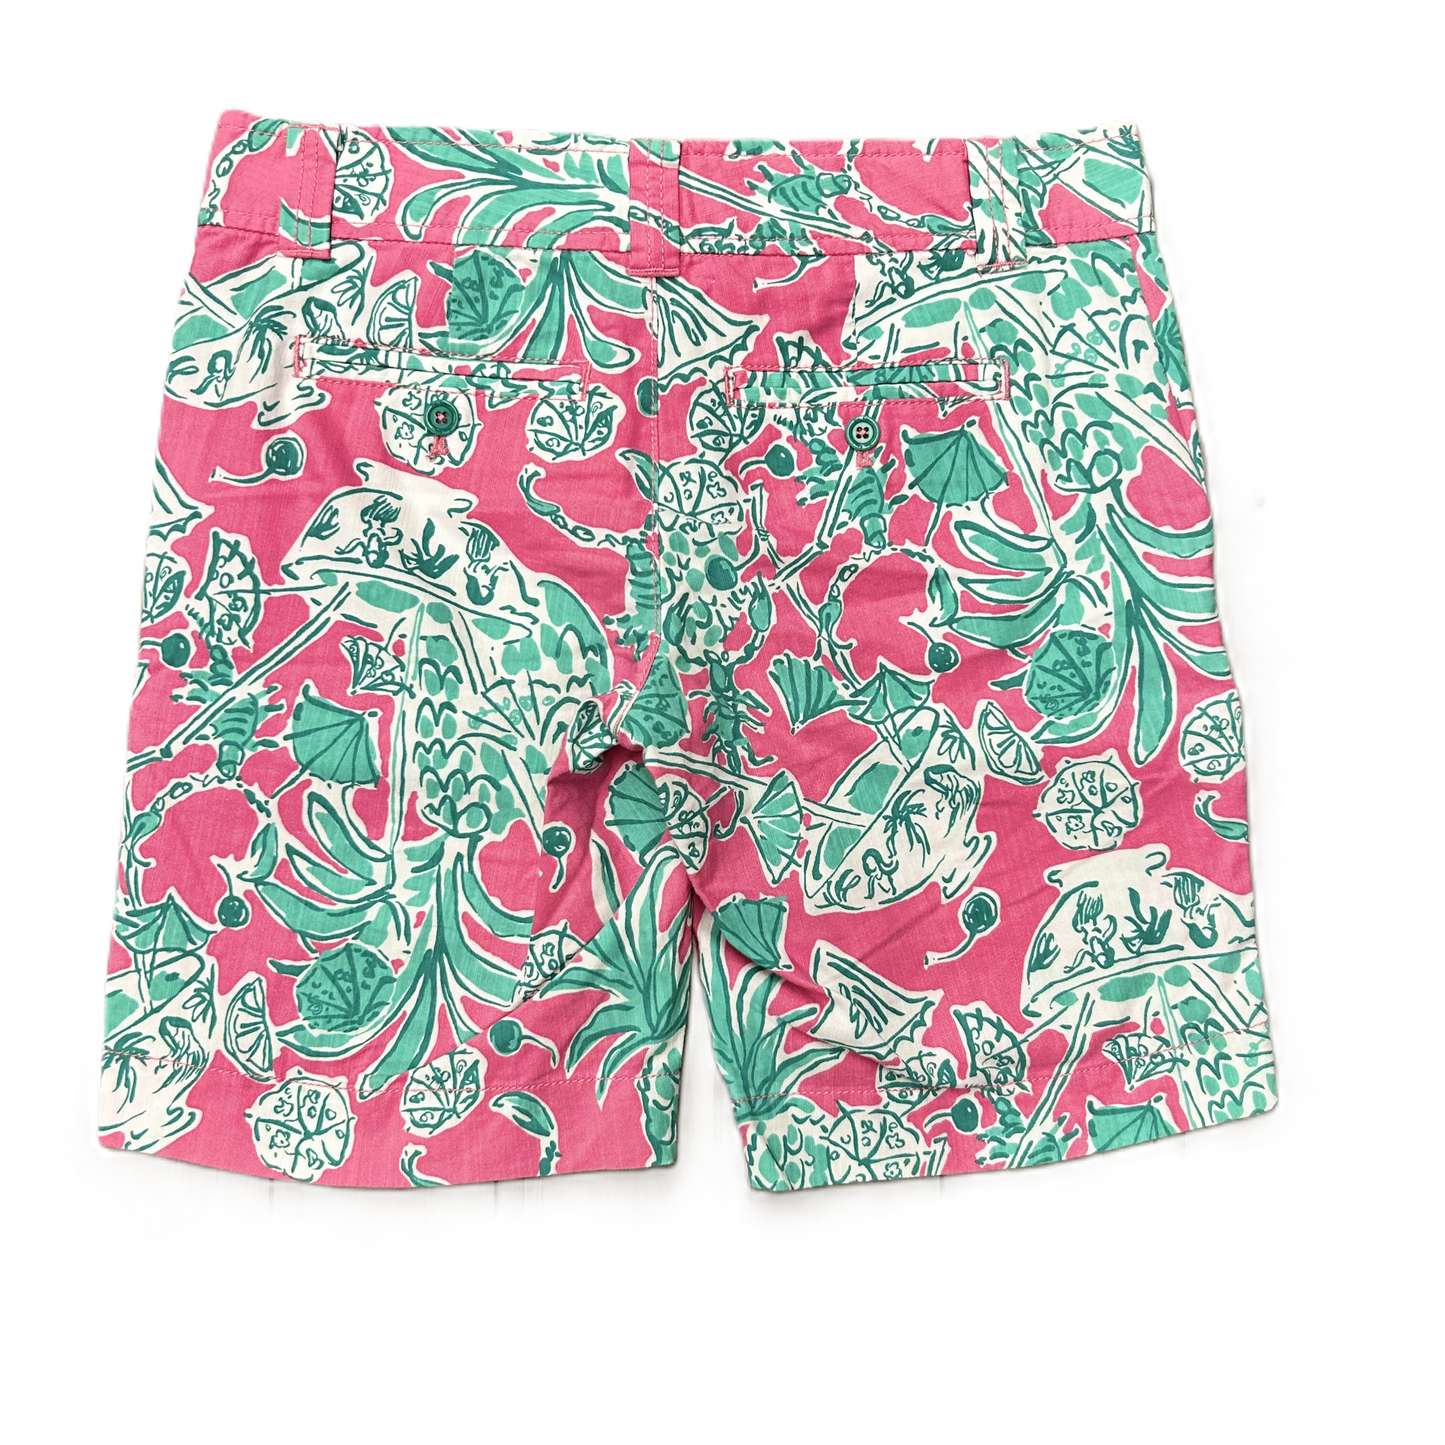 Multi-colored Shorts Designer By Lilly Pulitzer, Size: 2